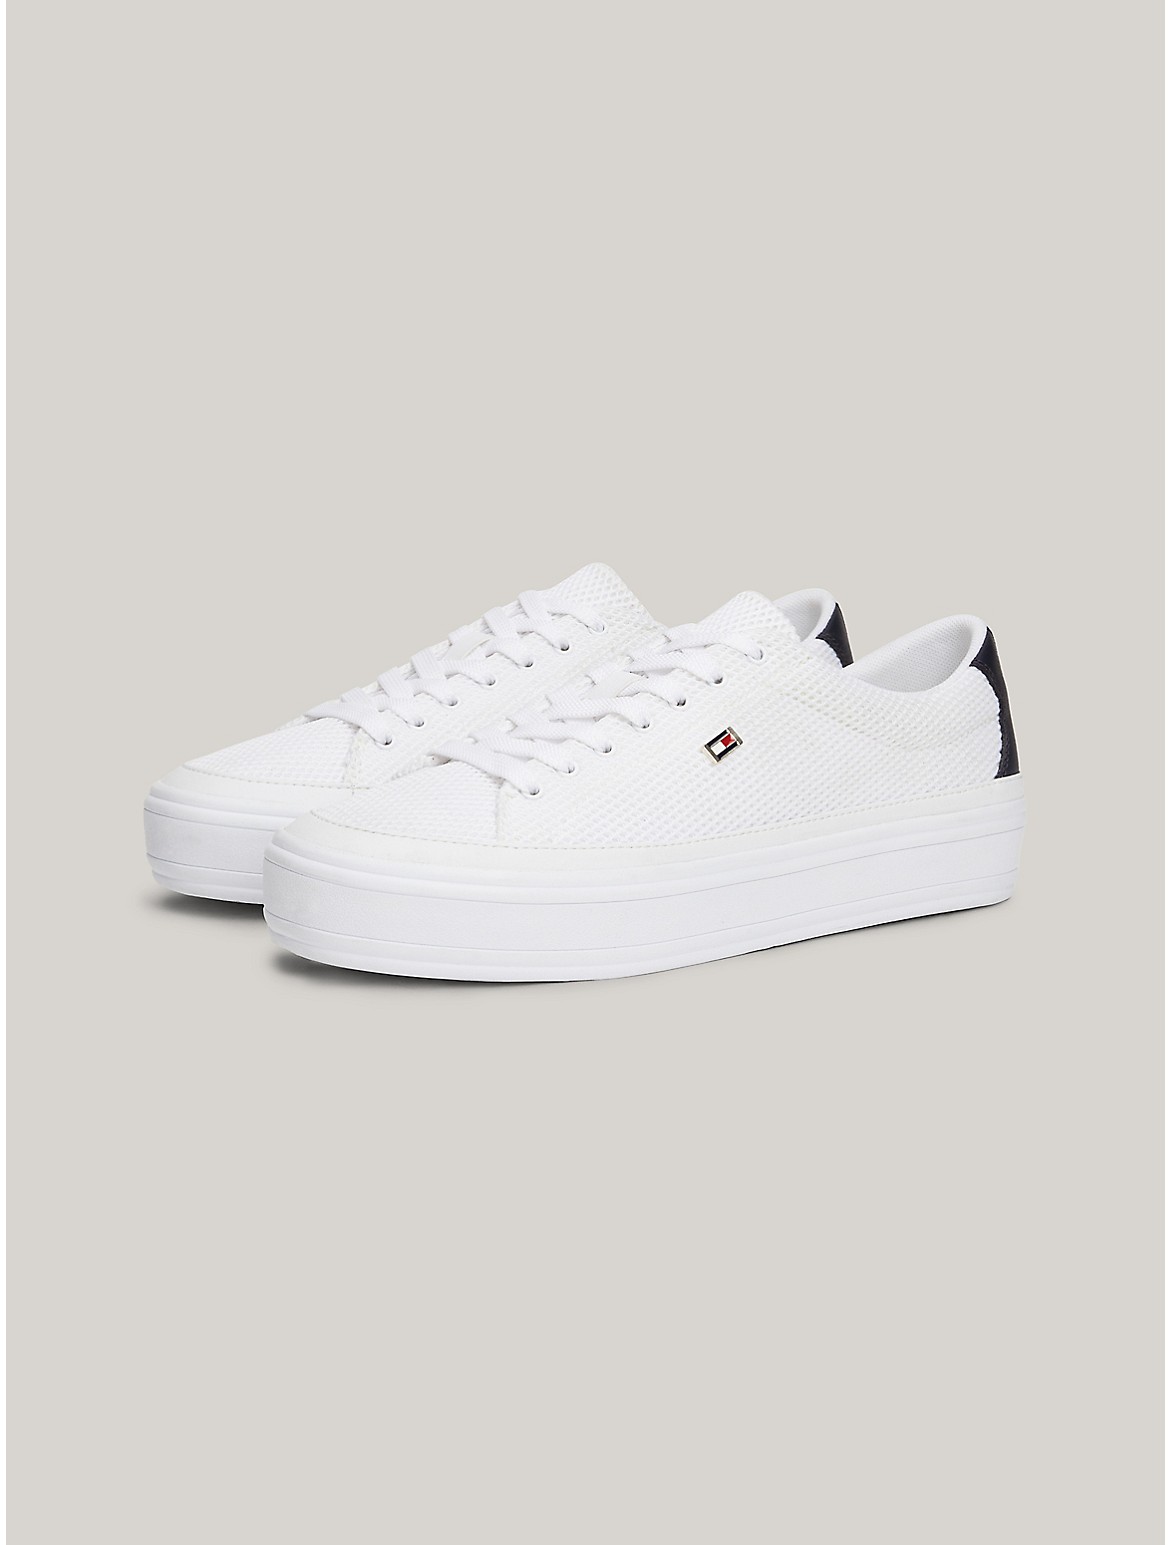 Tommy Hilfiger Flag Logo Mesh Sneaker In White/space Blue